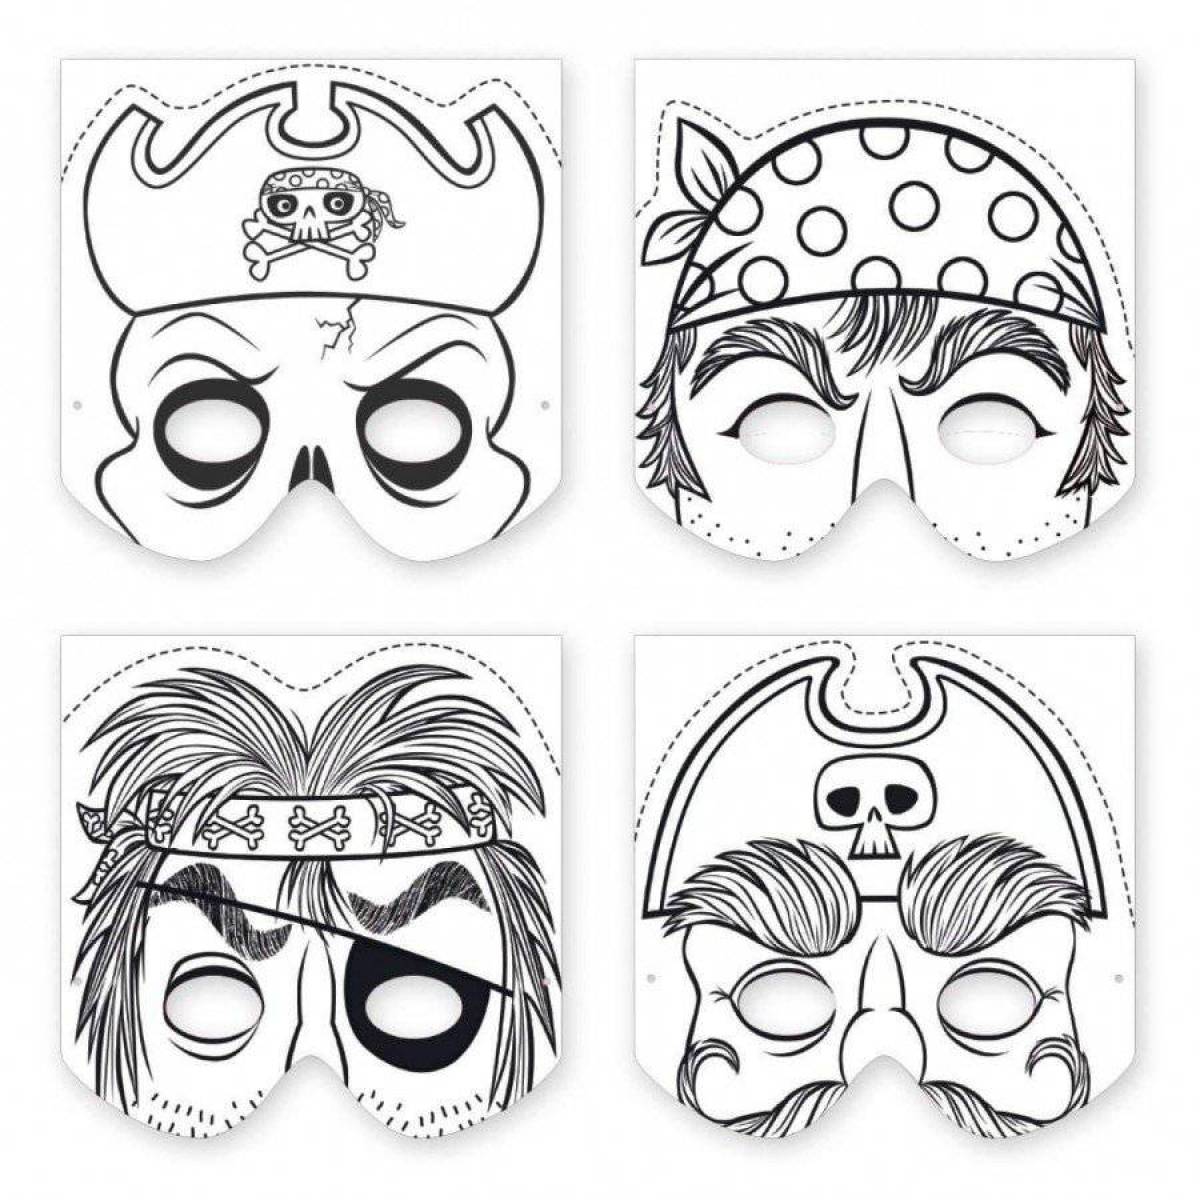 Exciting mask coloring page